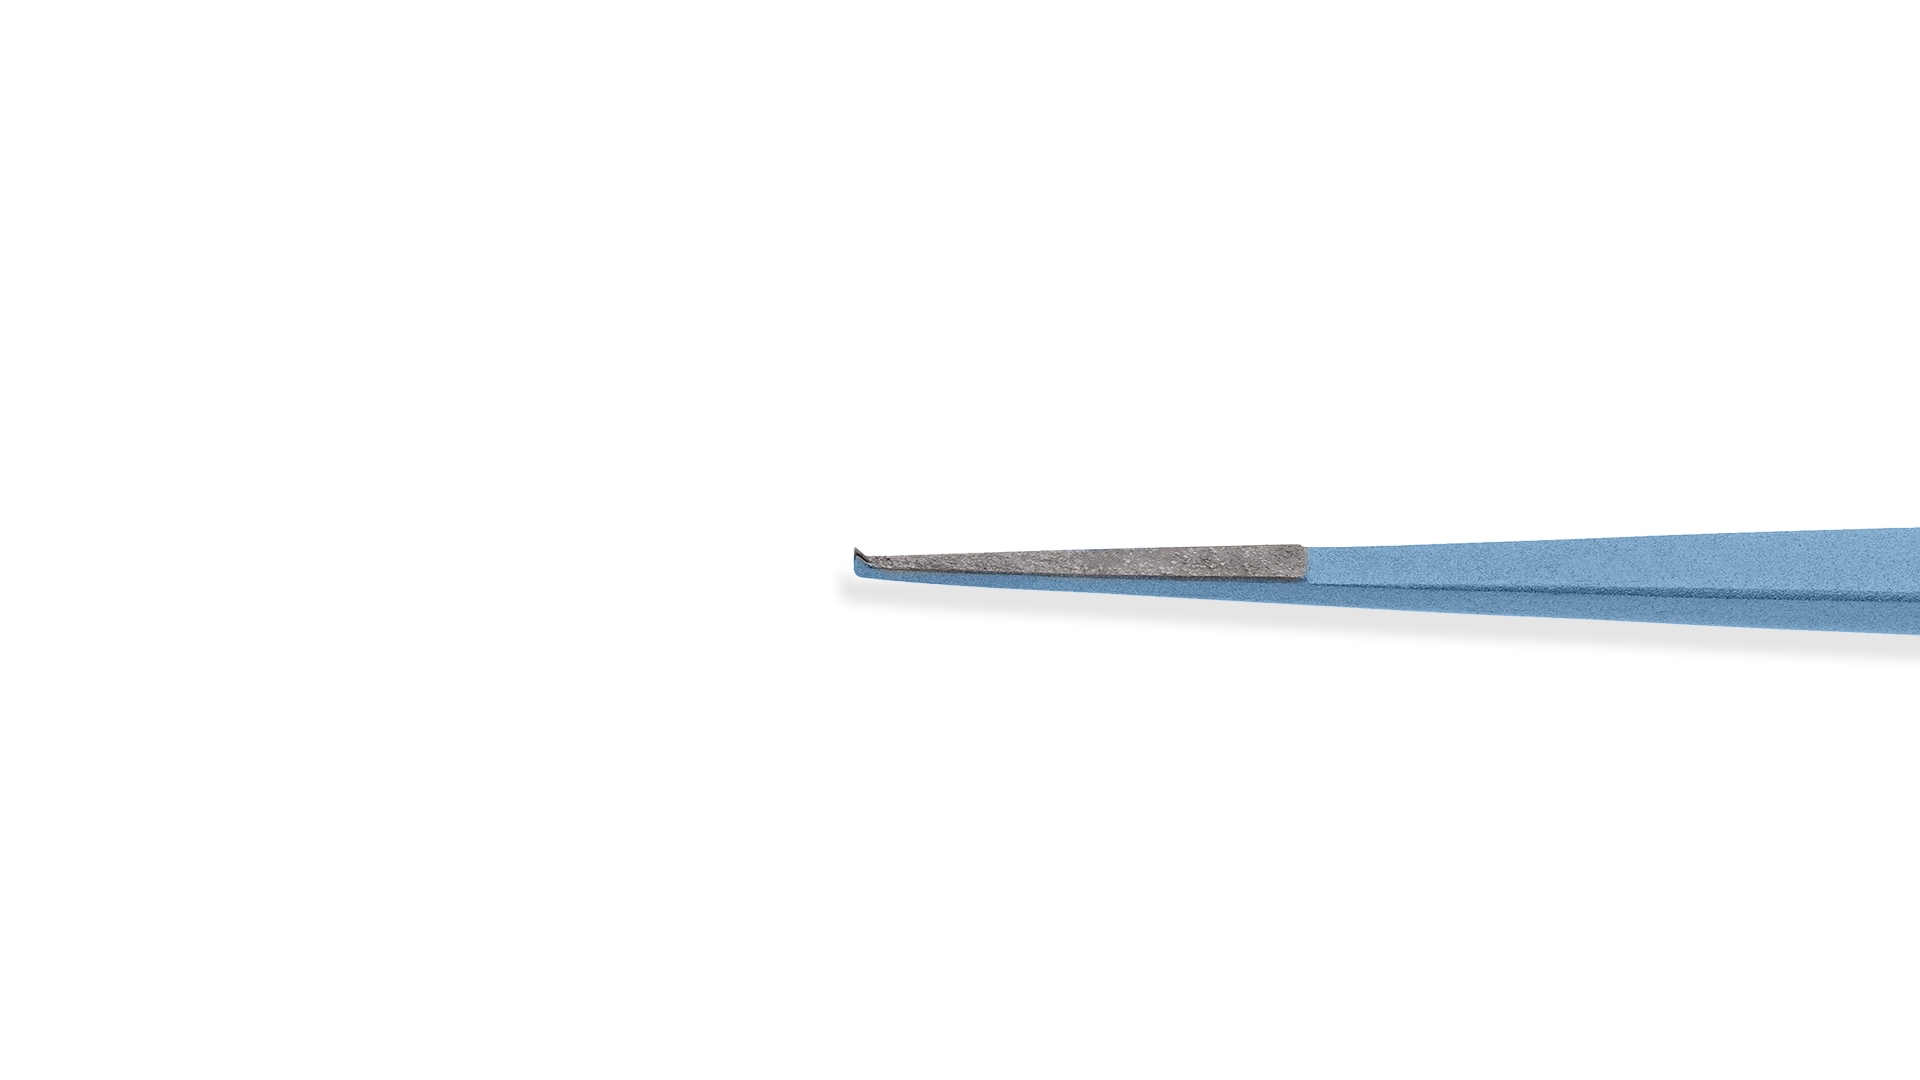 I.M.A. Forceps - Straight 0.35mm tips